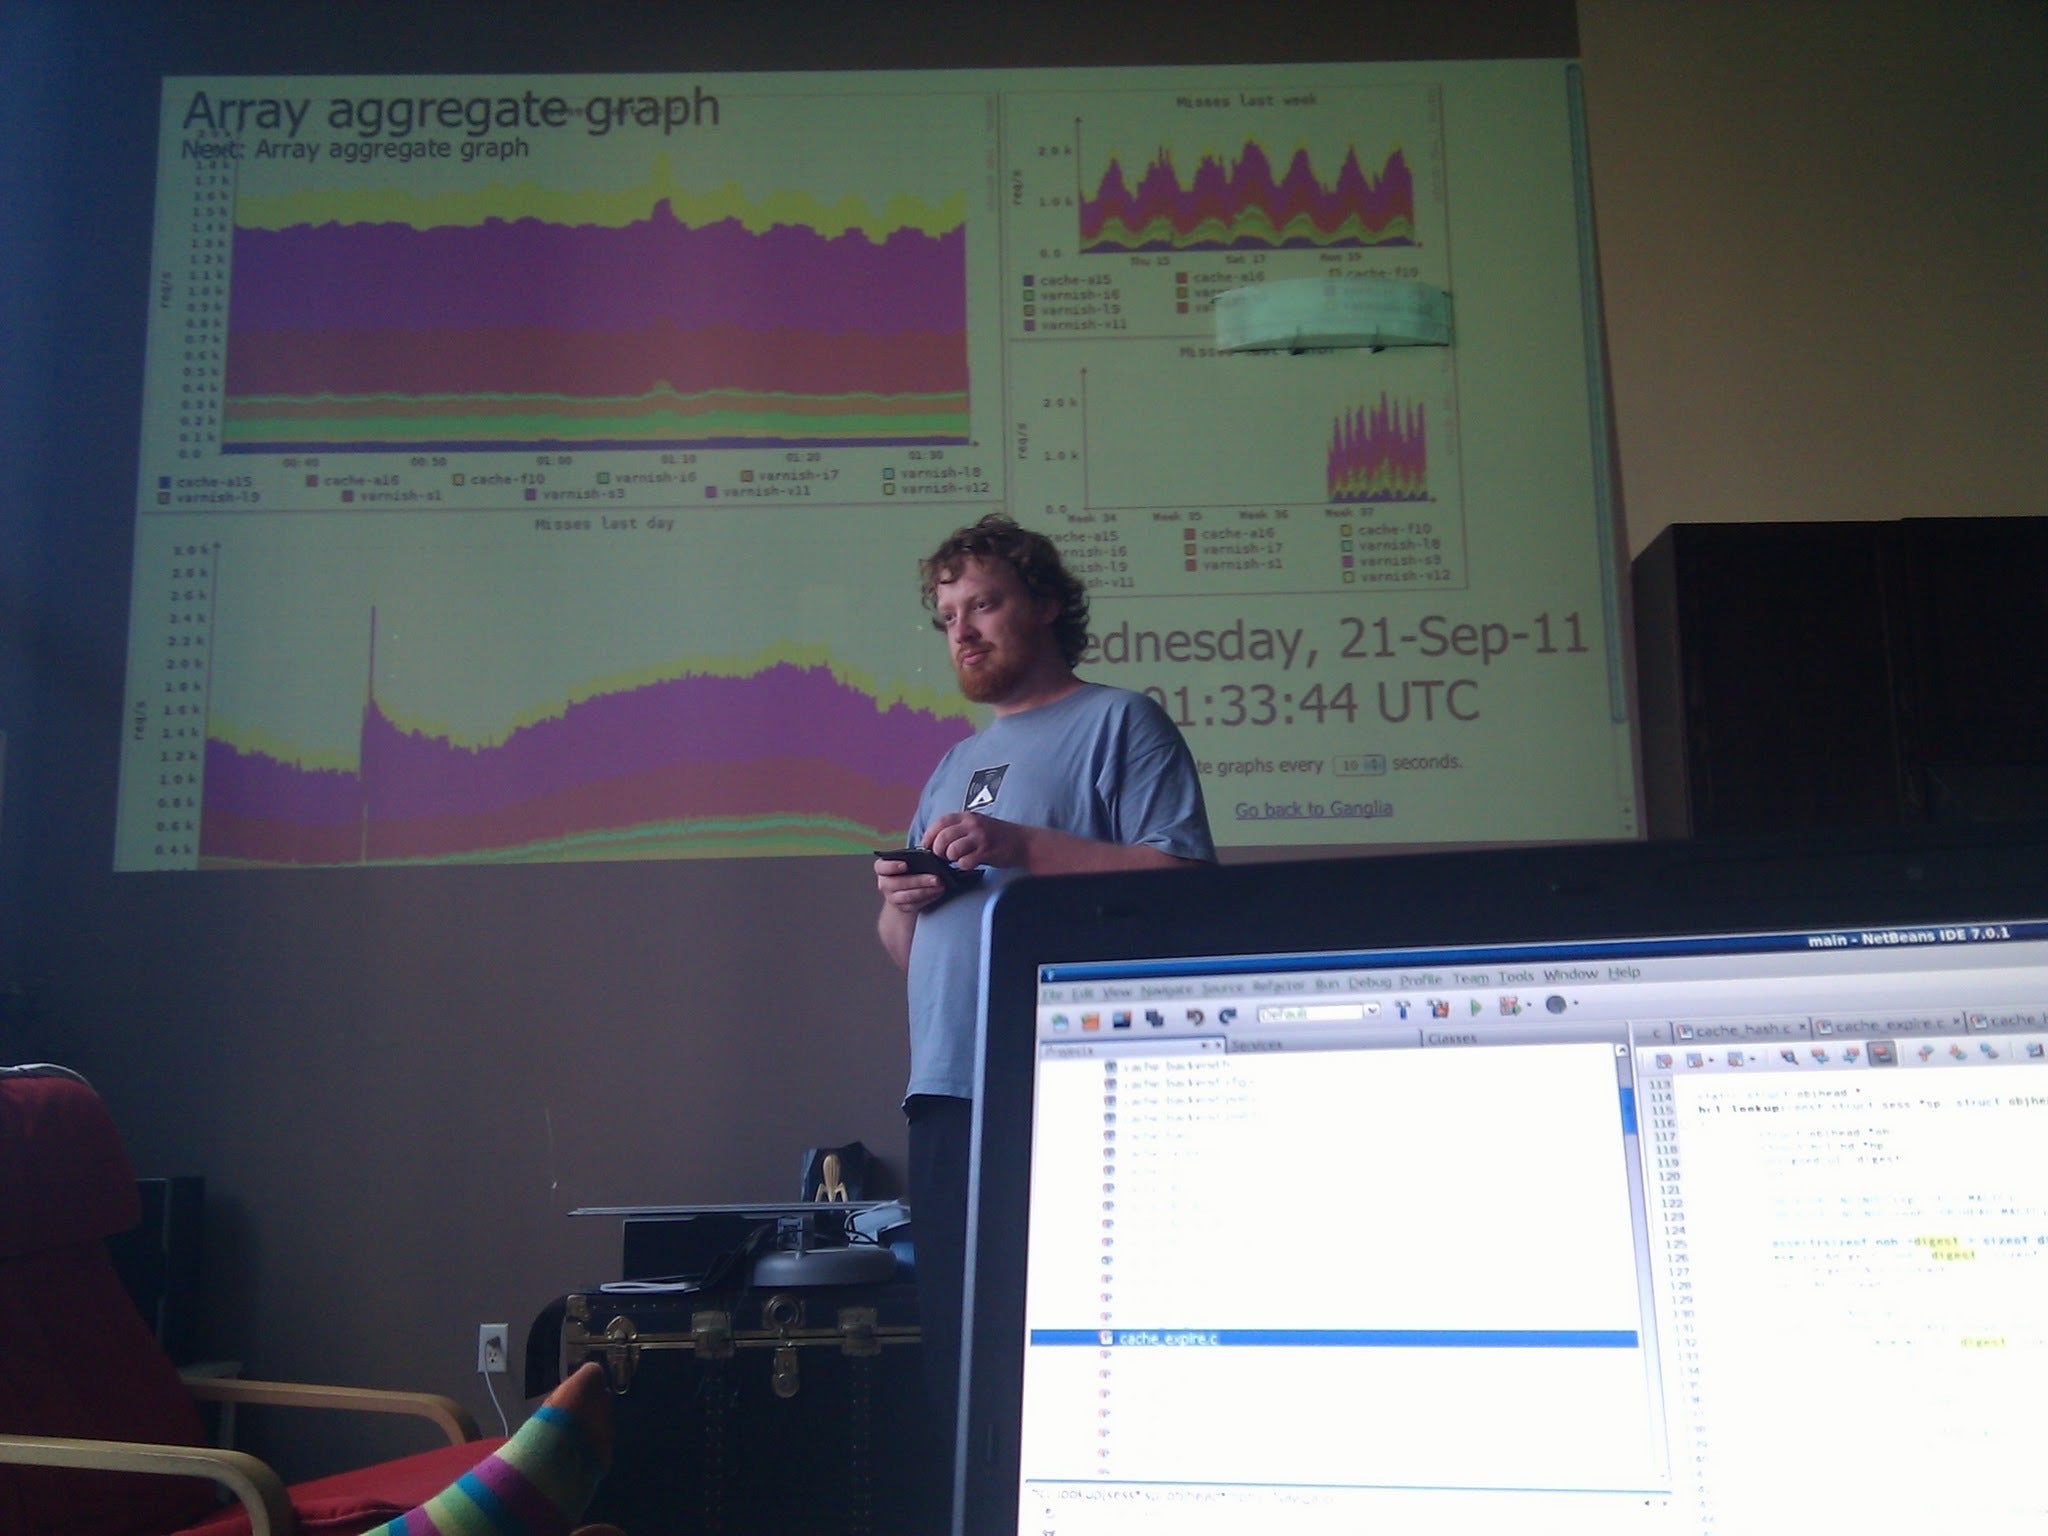 Artur runs a Fastly meeting from his living room in 2011